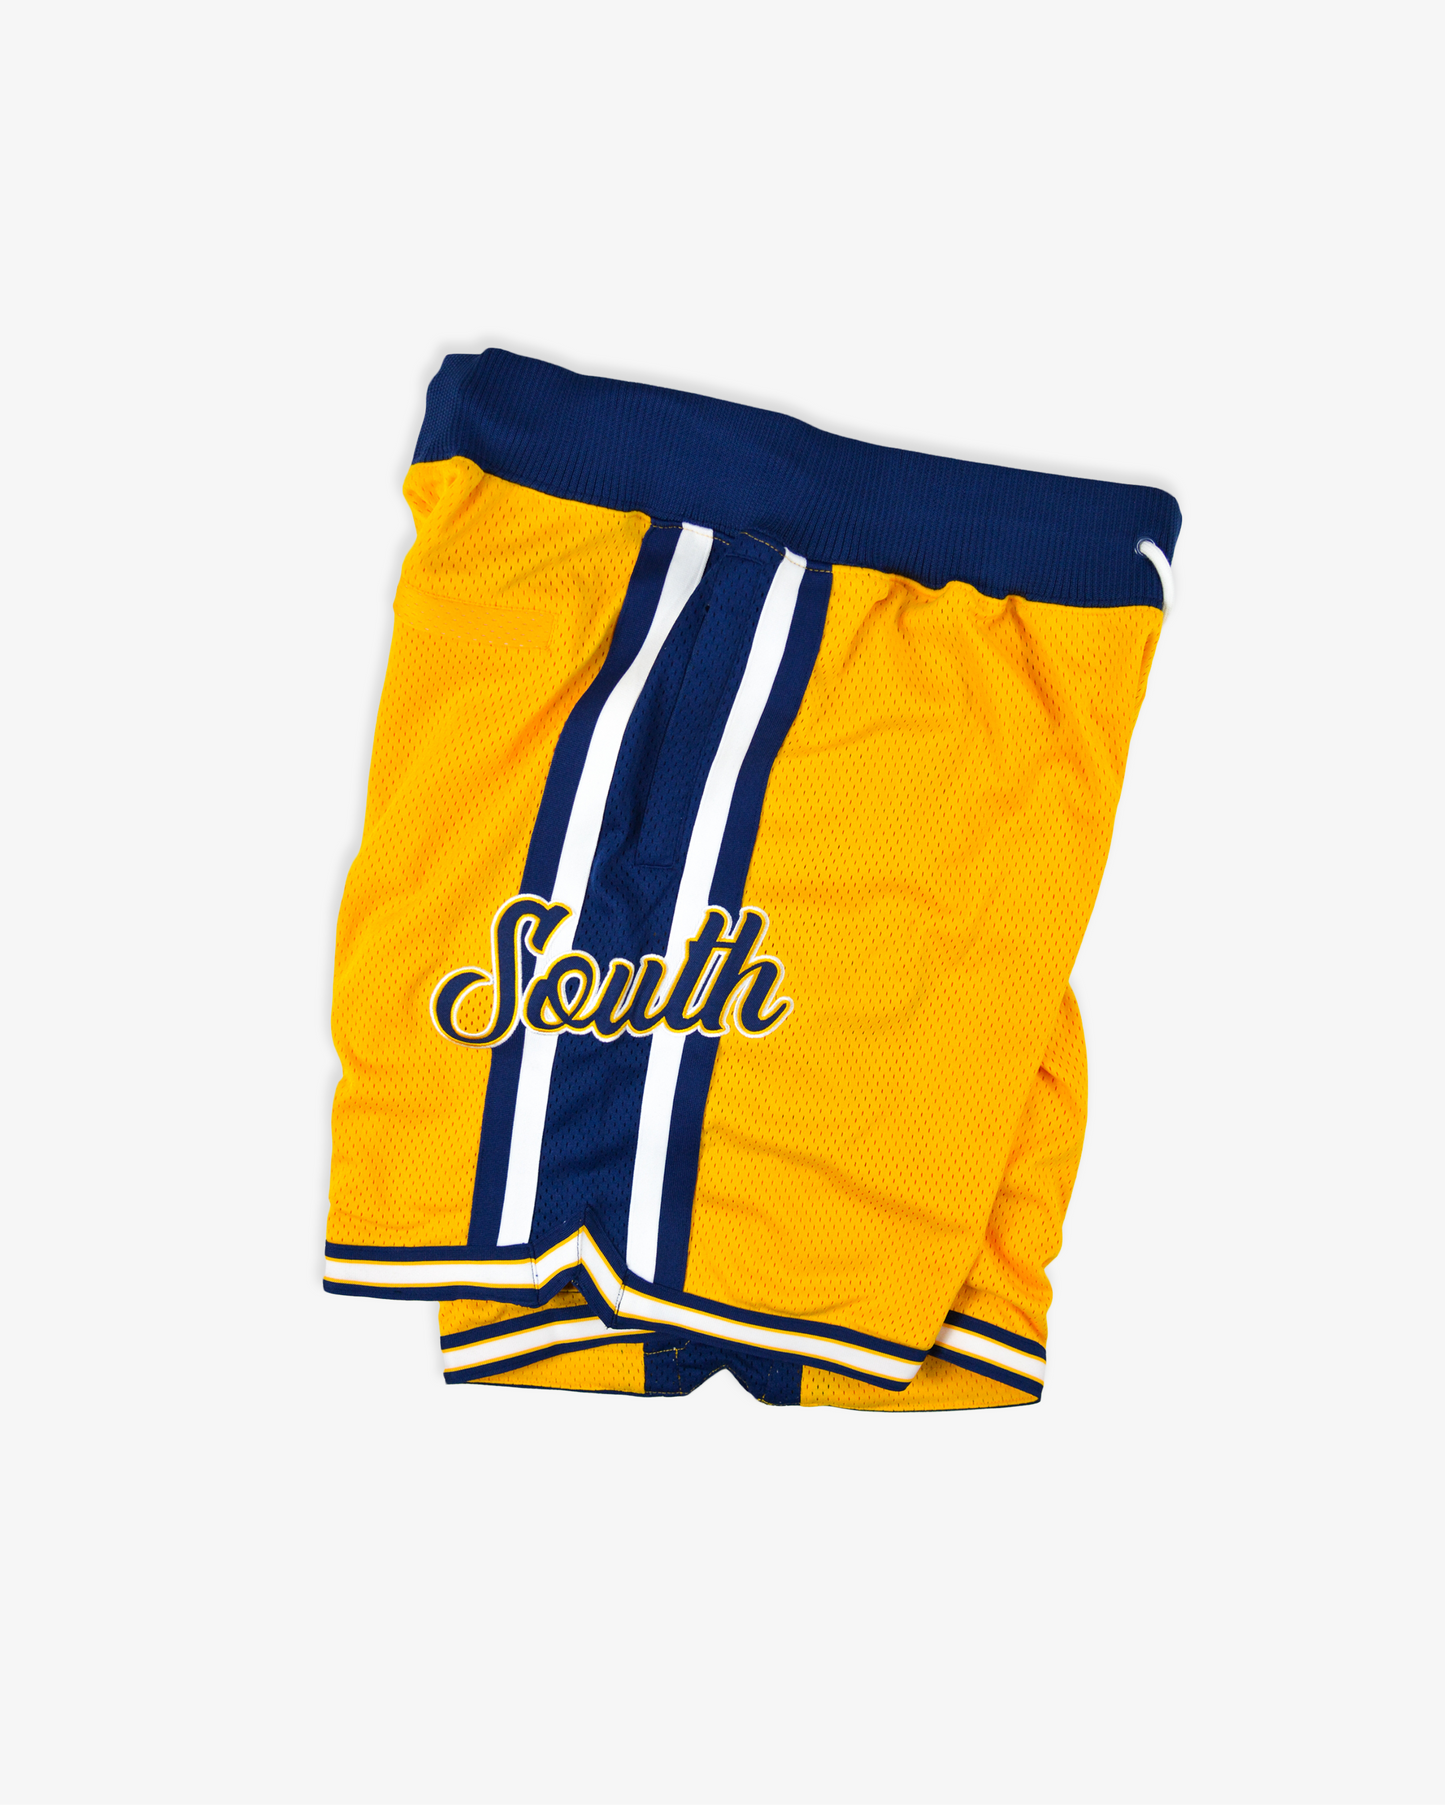 South Side Aggie Basketball Shorts